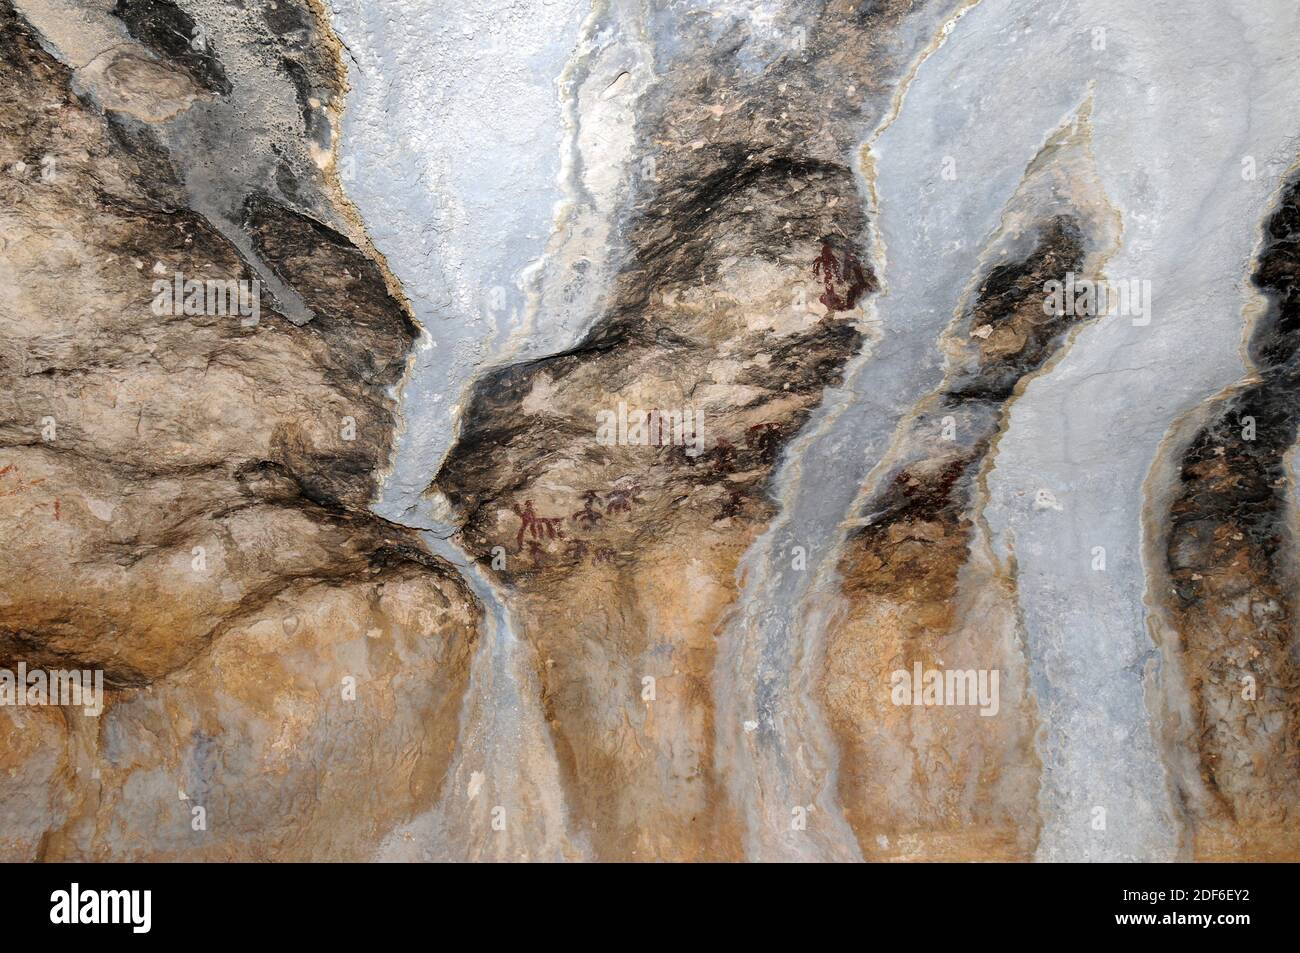 Tozal de Mallata, cave paintings. The precipitation of calcium carbonate is destroying the paintings. Asque, Colungo municipality, Sierra y Cañones Stock Photo